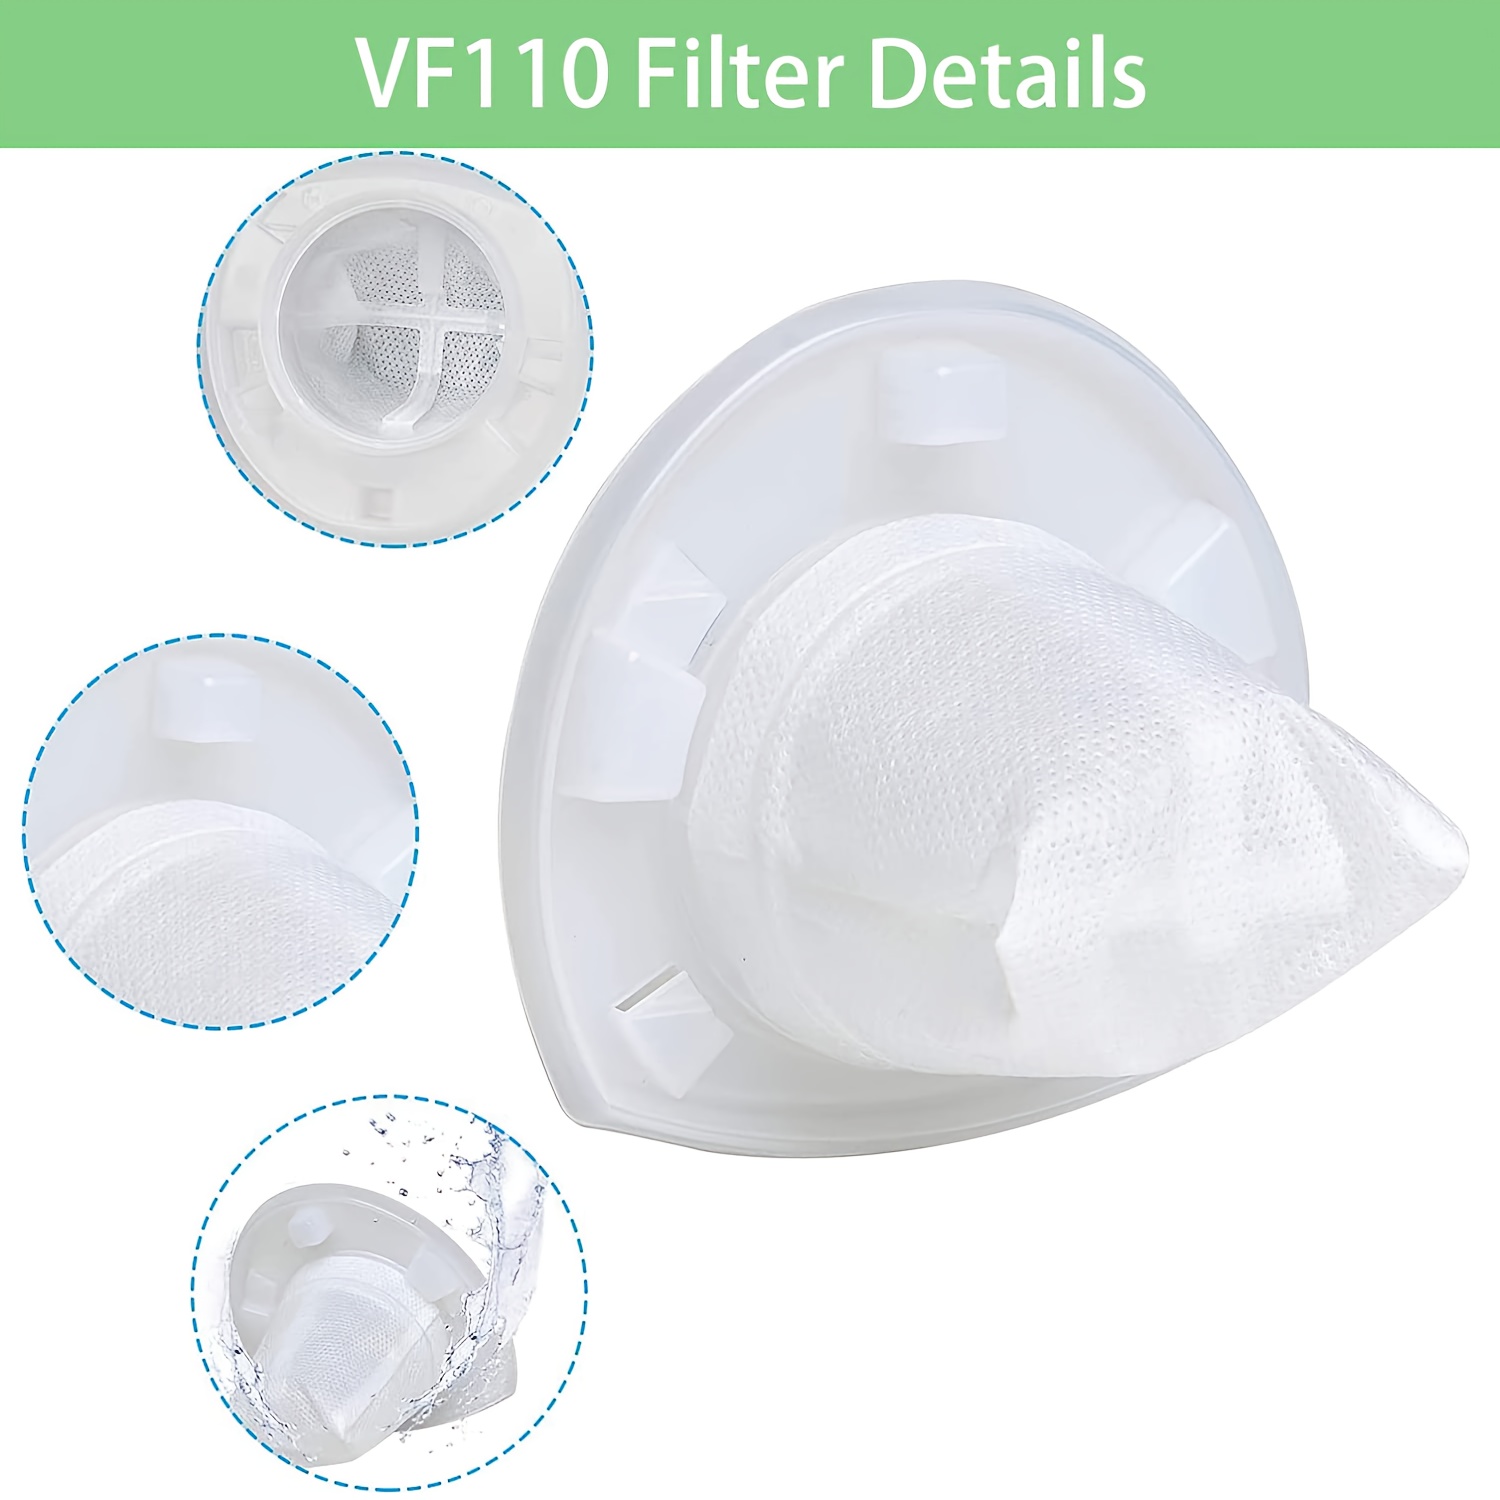 9 Pack Replacement Filter for Black and Decker Power Tools VF110